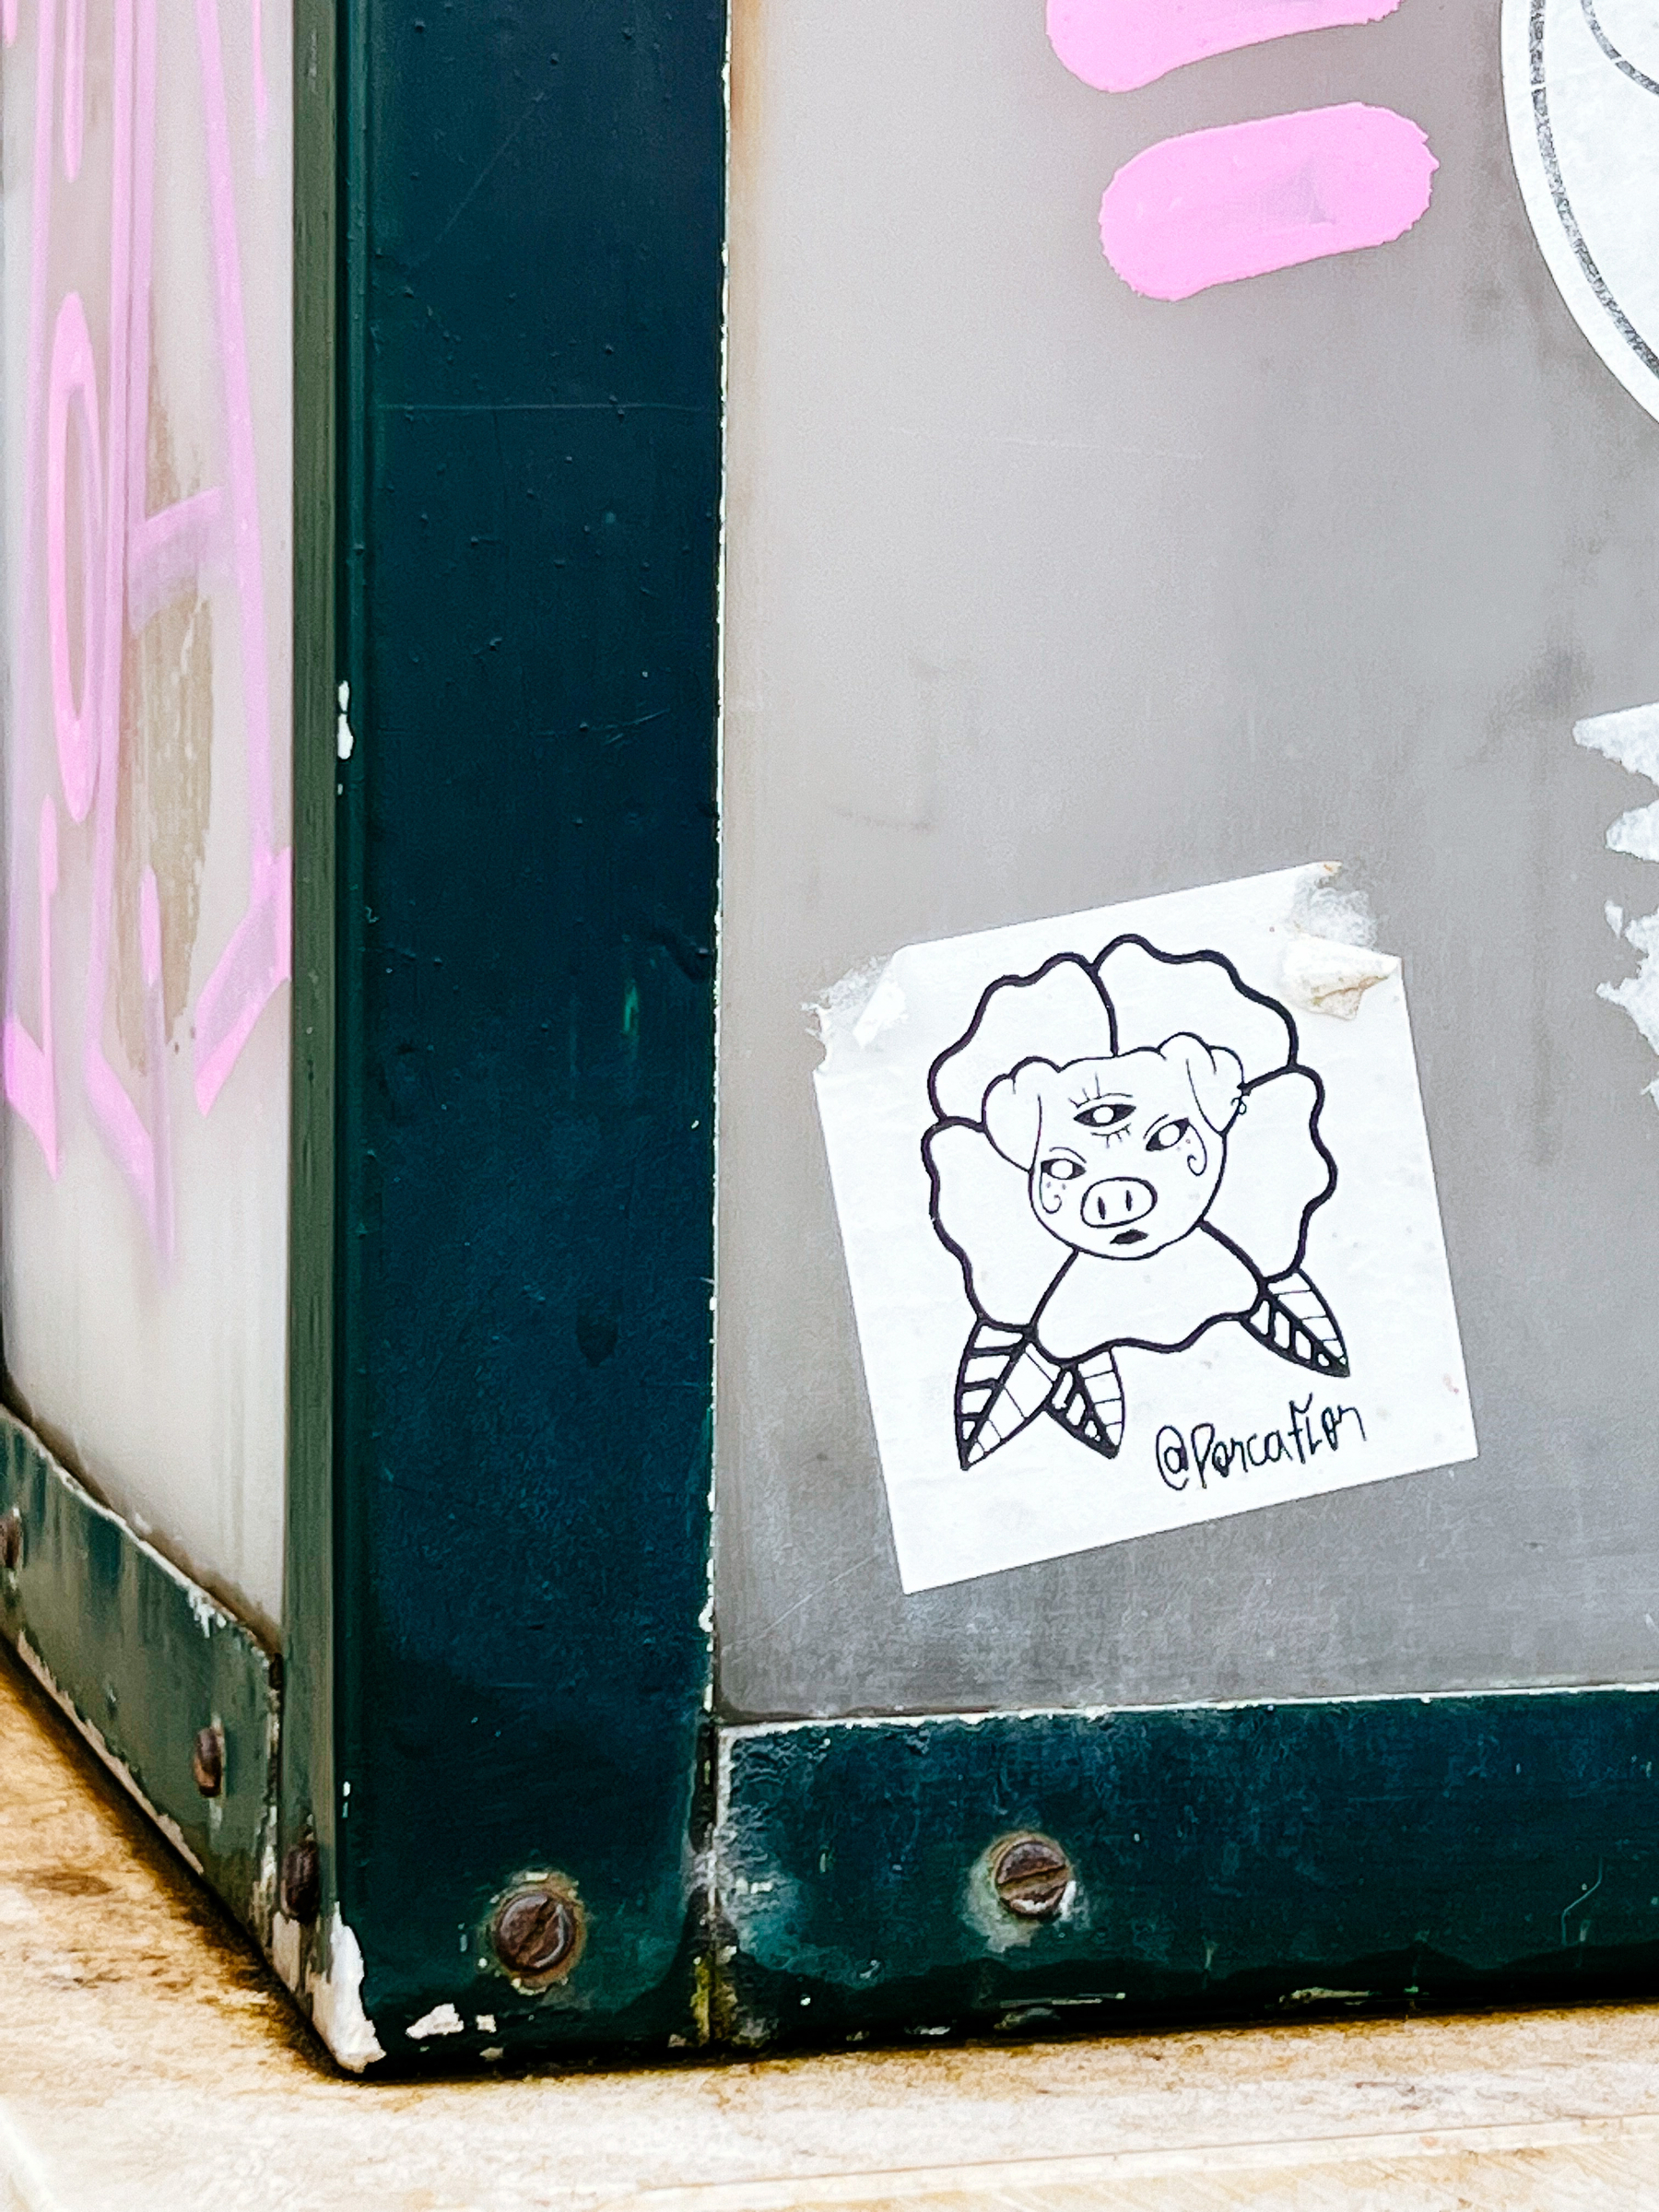 Sticker of a tattoo design, with a pig’s face surrounded by a flower. The pig has a third eye. 